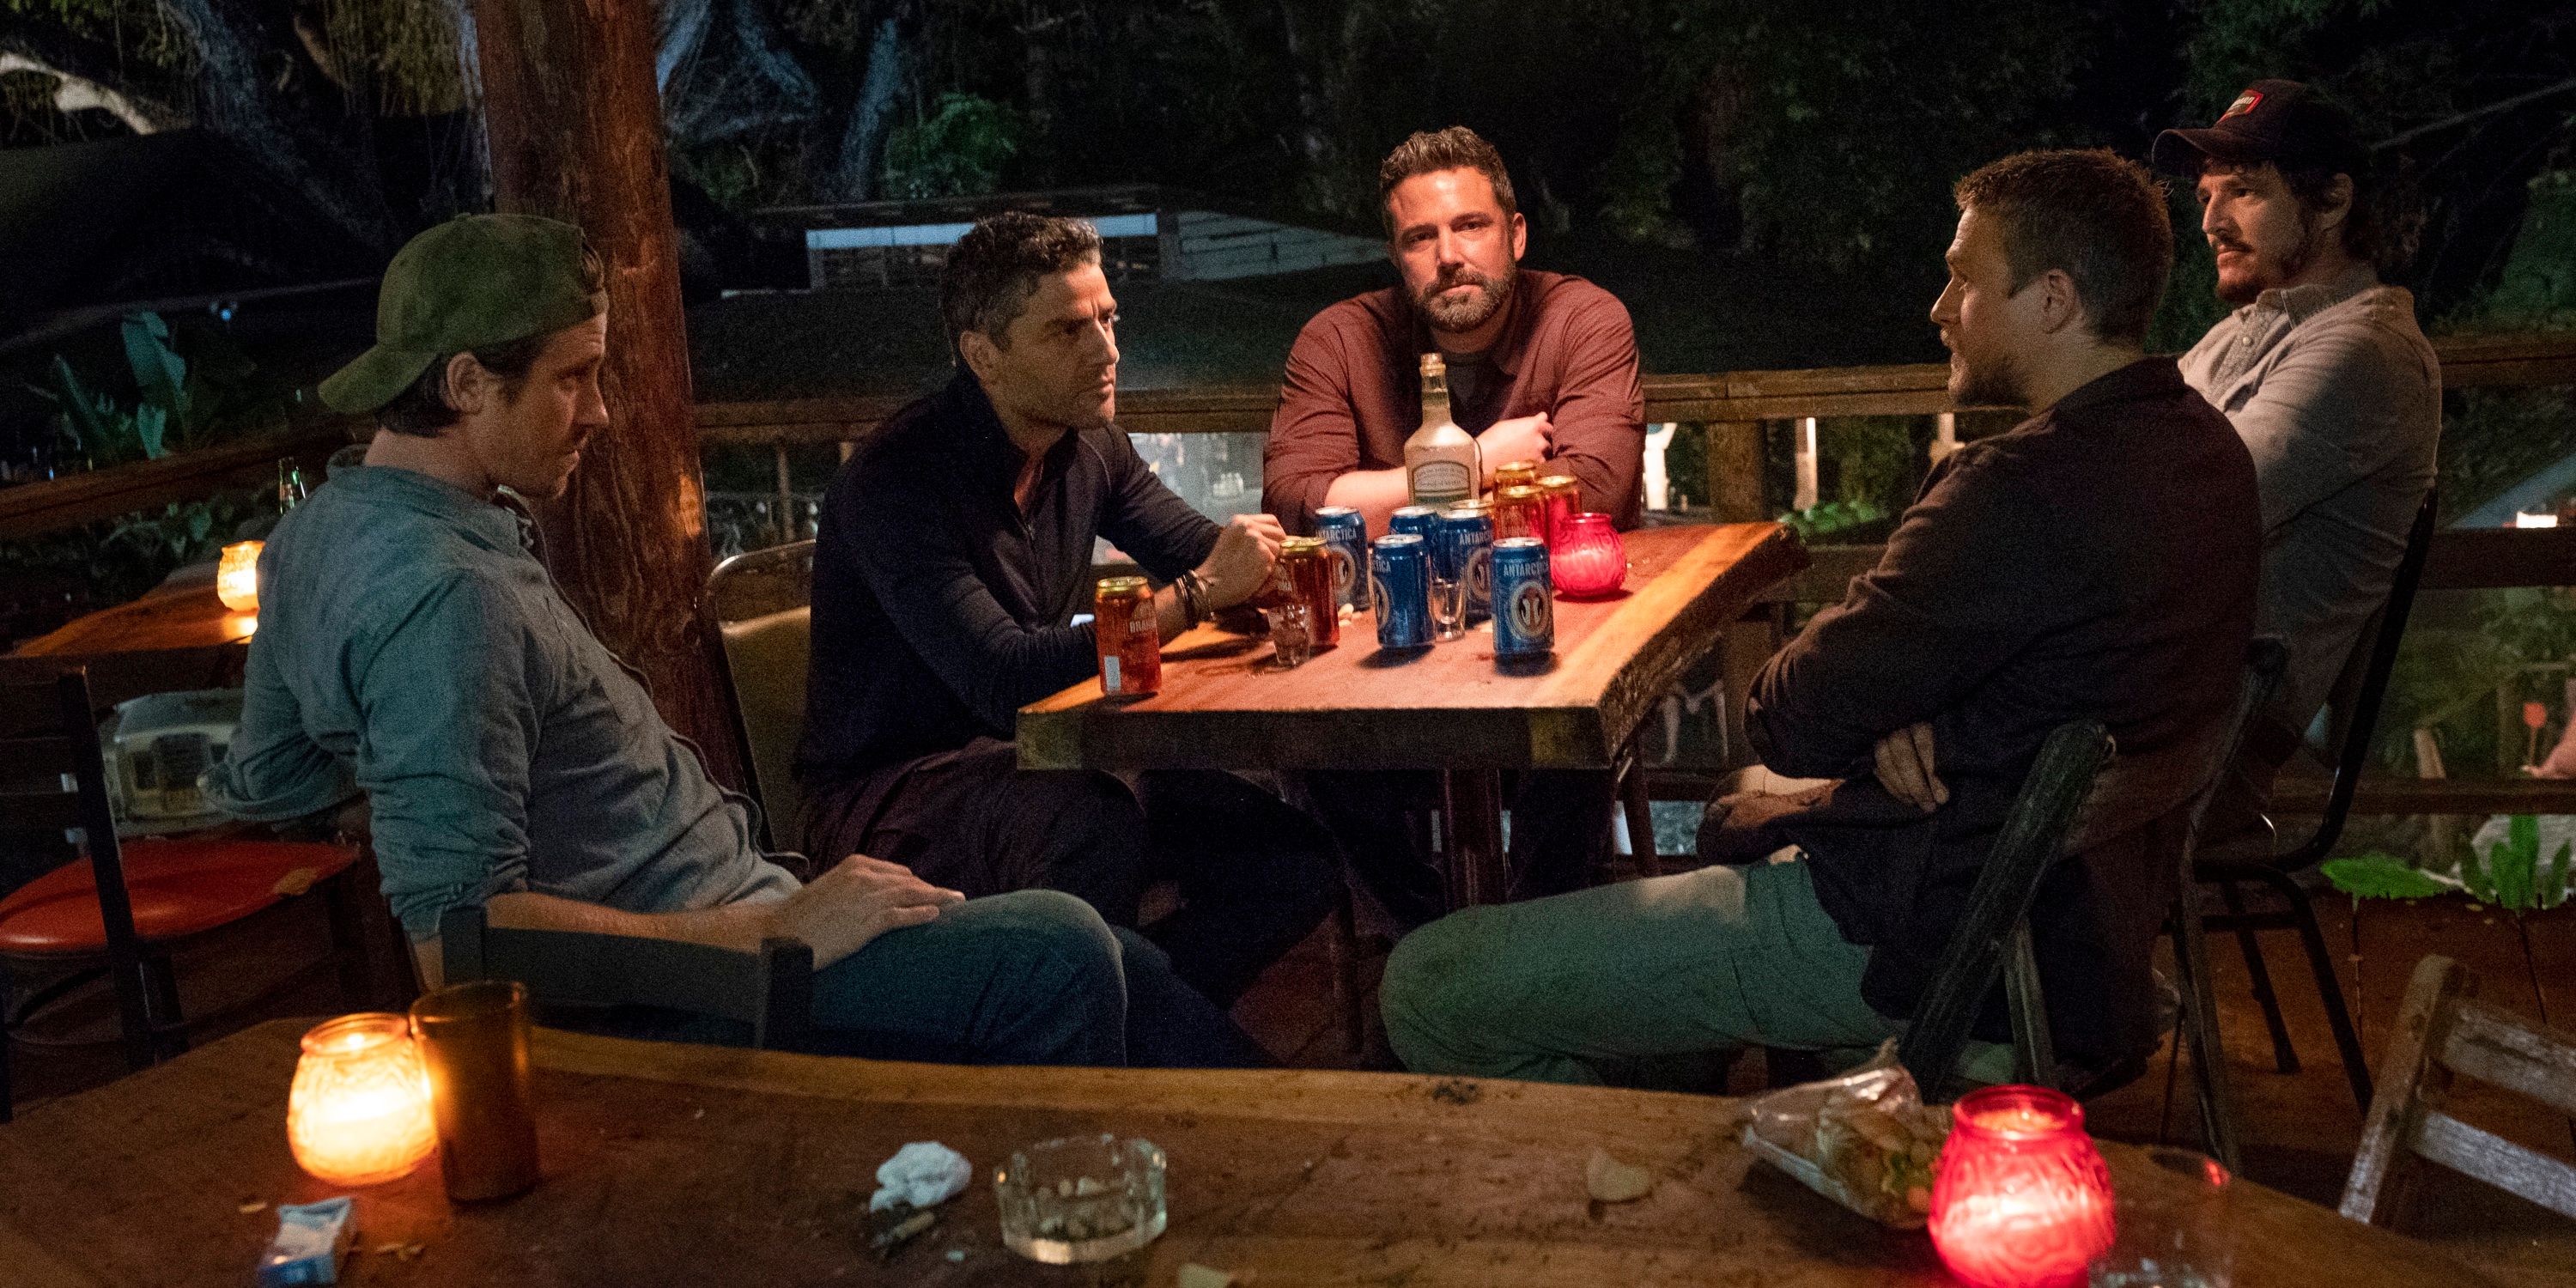 Triple Frontier Review Affleck & Isaac Lead Strong Thriller